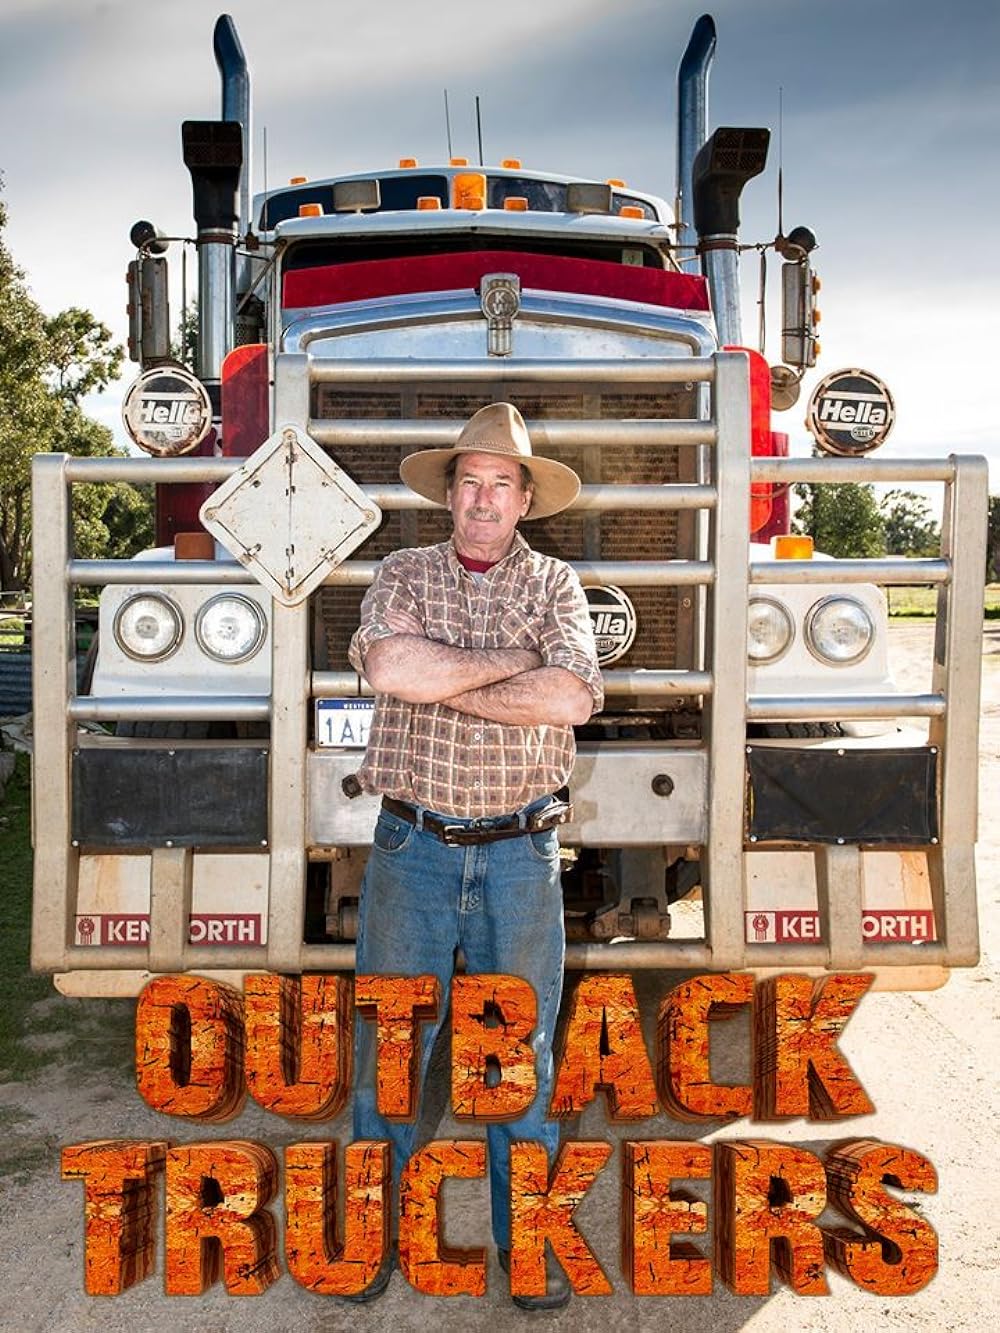 Outback Truckers (2012)